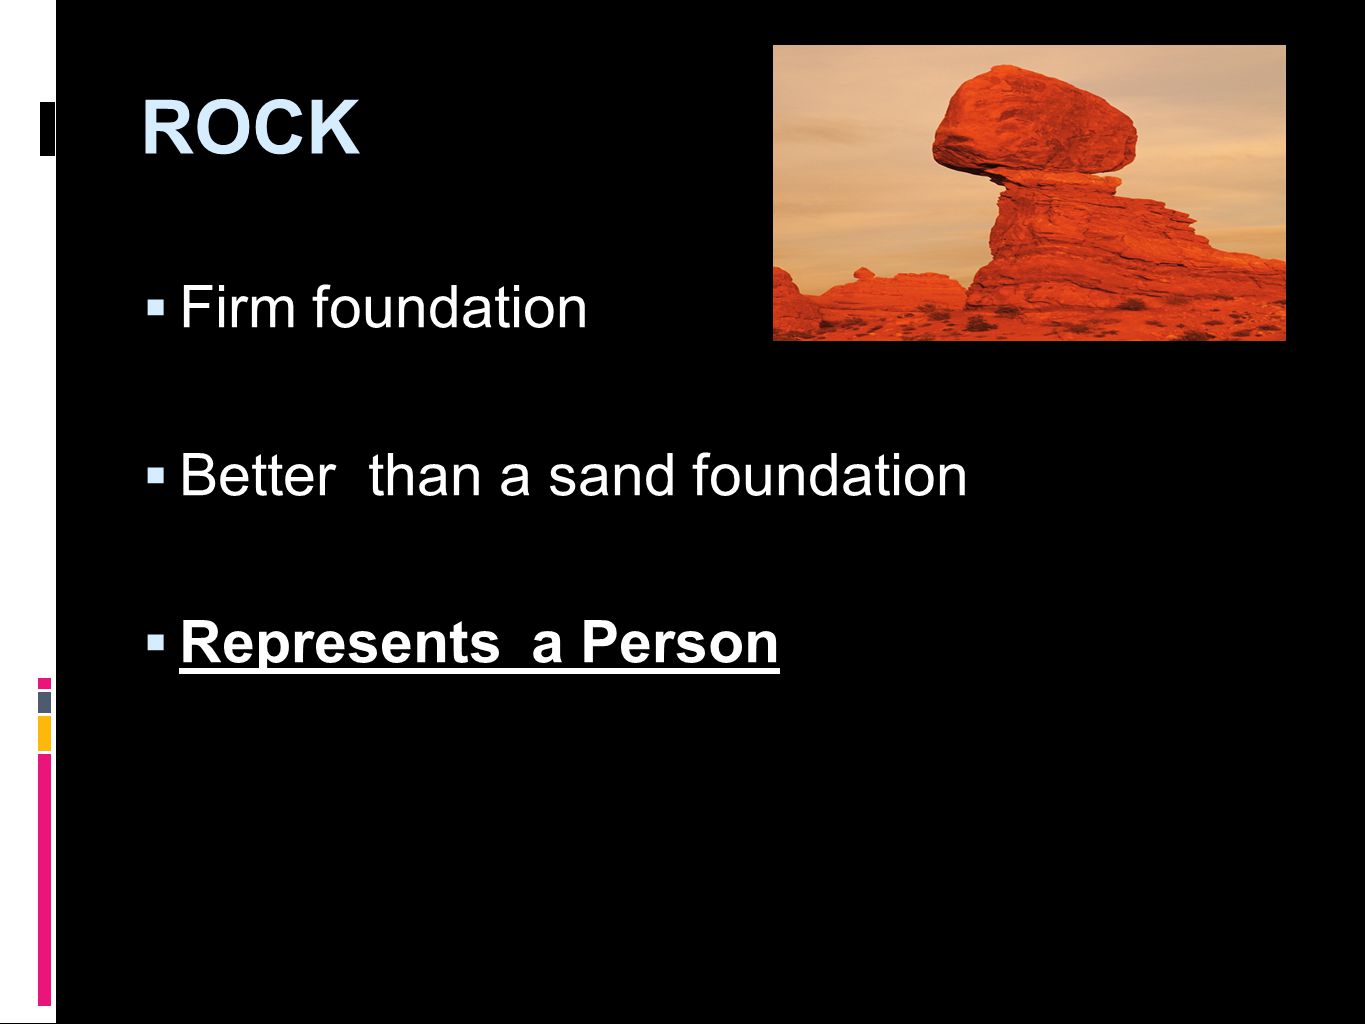  Firm foundation  Better than a sand foundation  Represents a Person